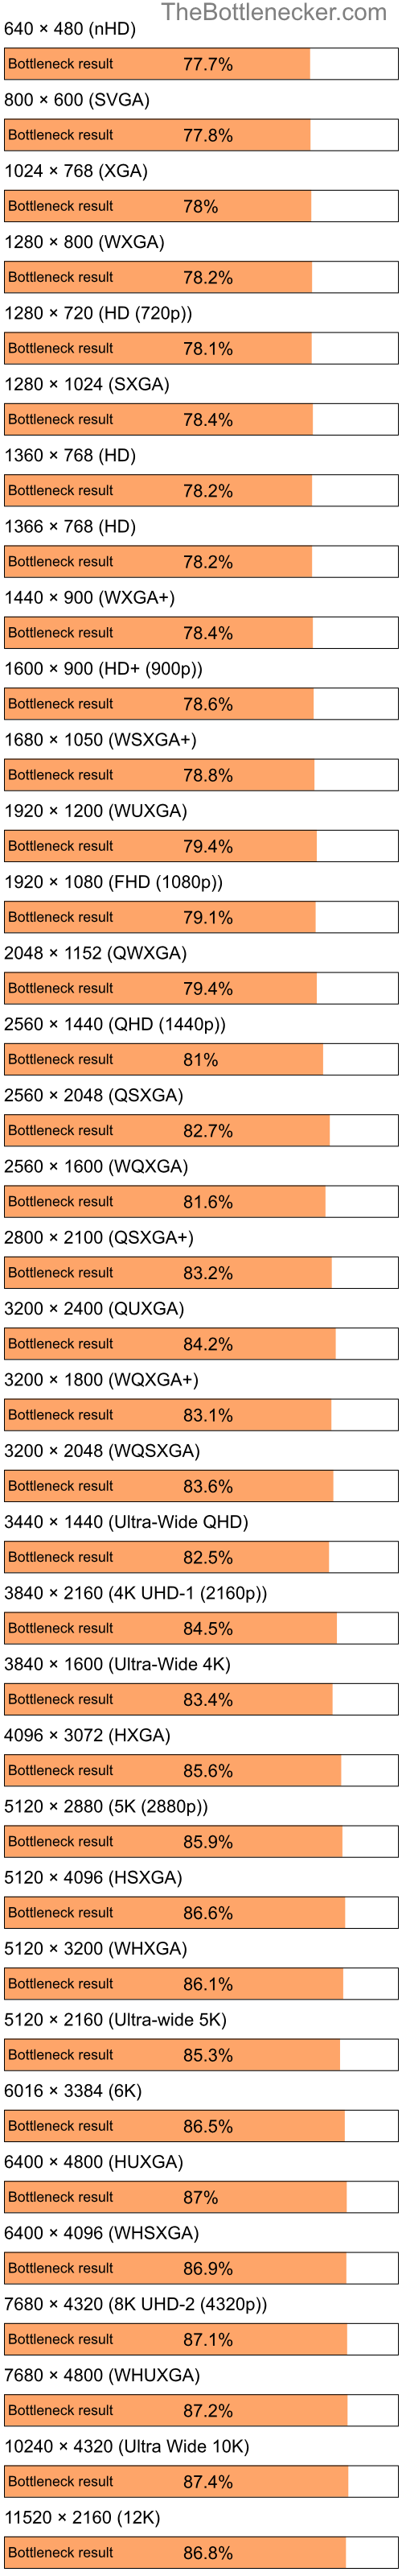 Bottleneck results by resolution for Intel Atom Z520 and NVIDIA GeForce 7025 in7 Days to Die